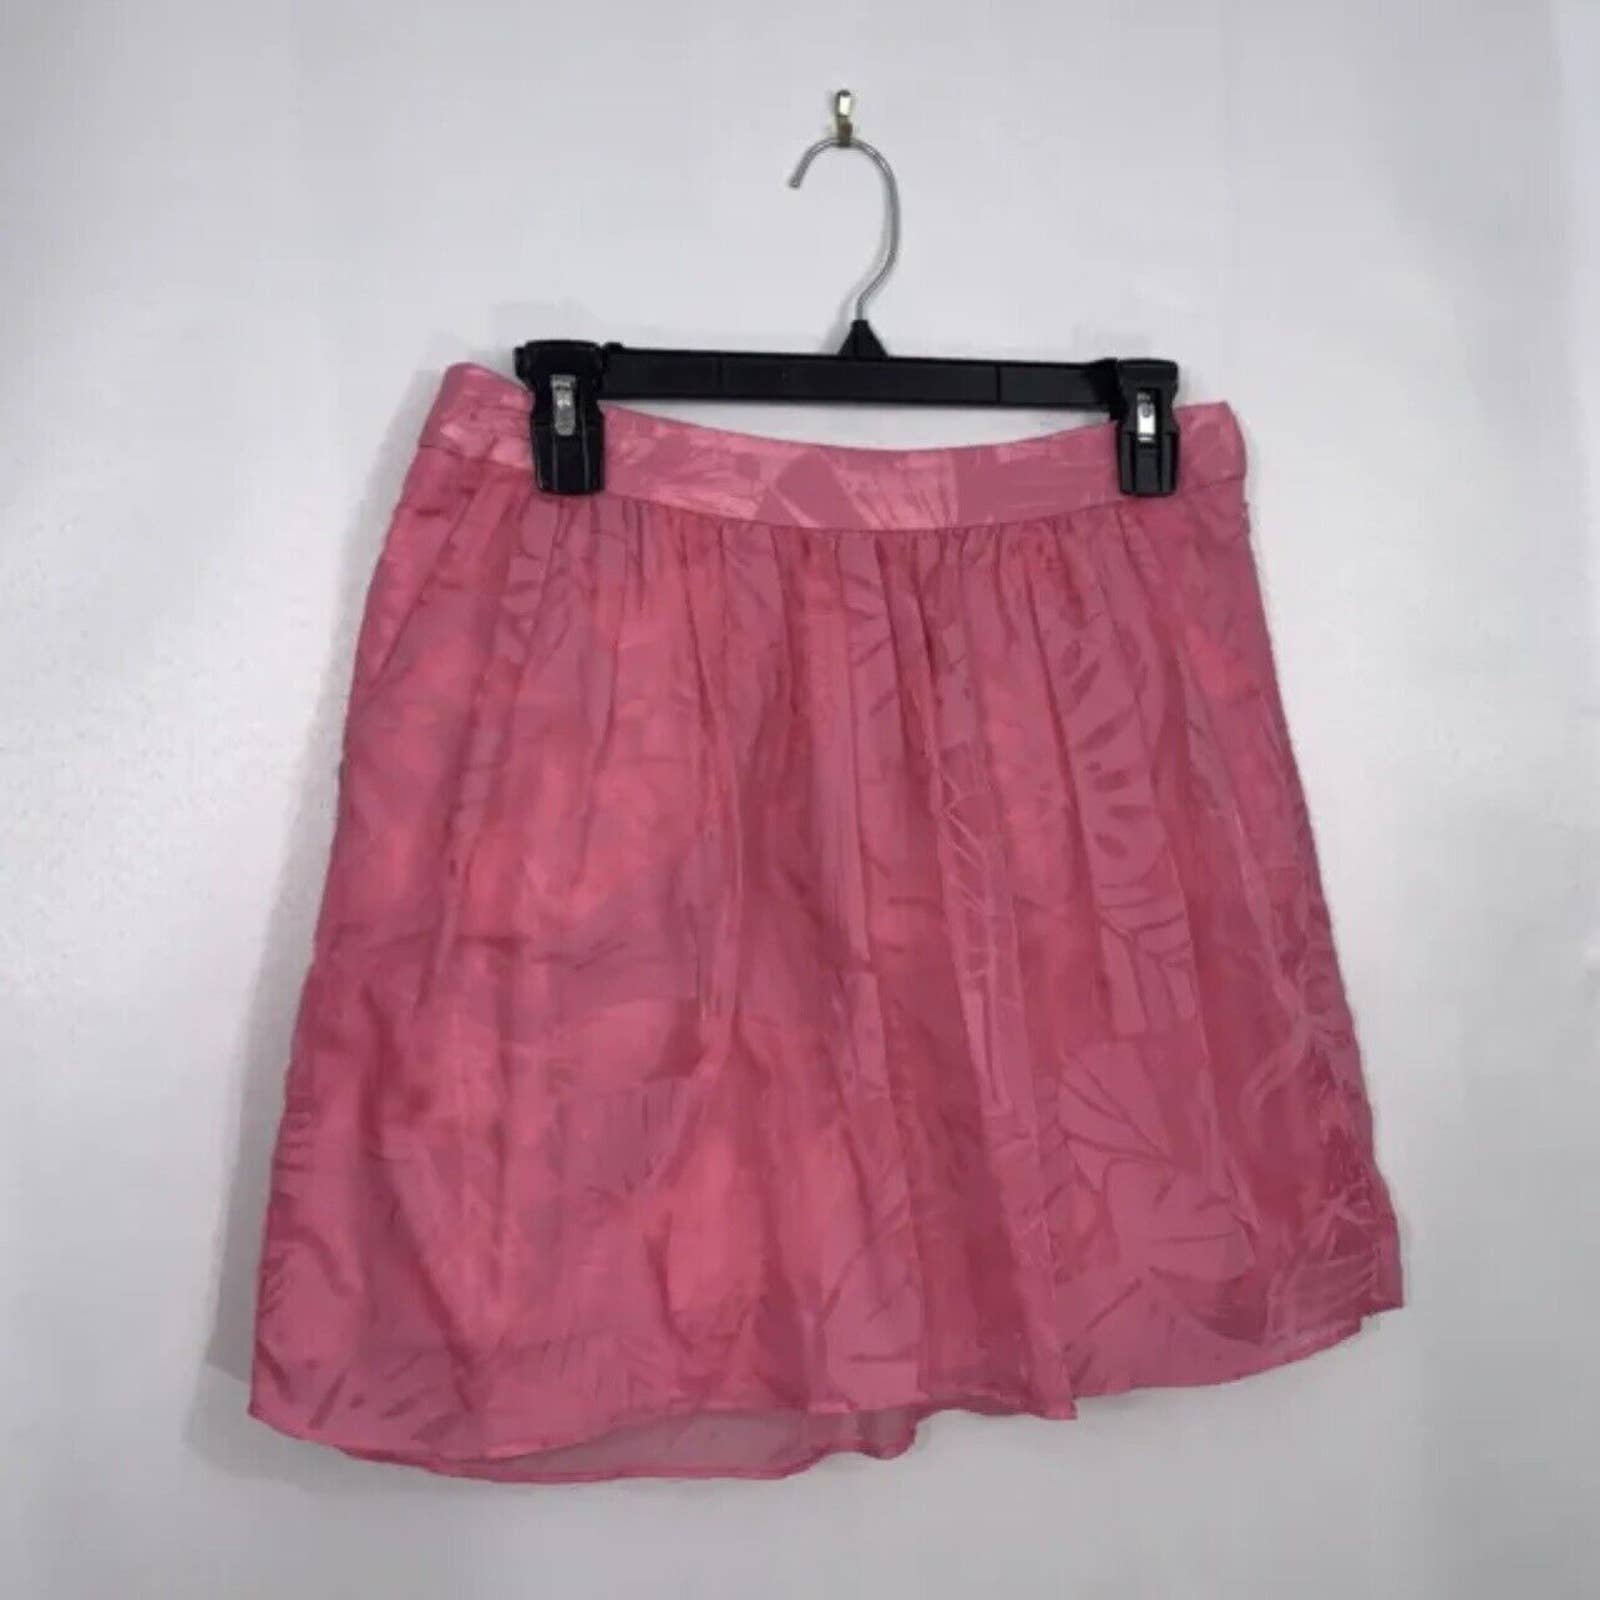 Nice Lilly Pulitzer Women´s Whitley Burnout Floral Print Skirt Pink Size 4 FL3PCi8Q2 Low Price